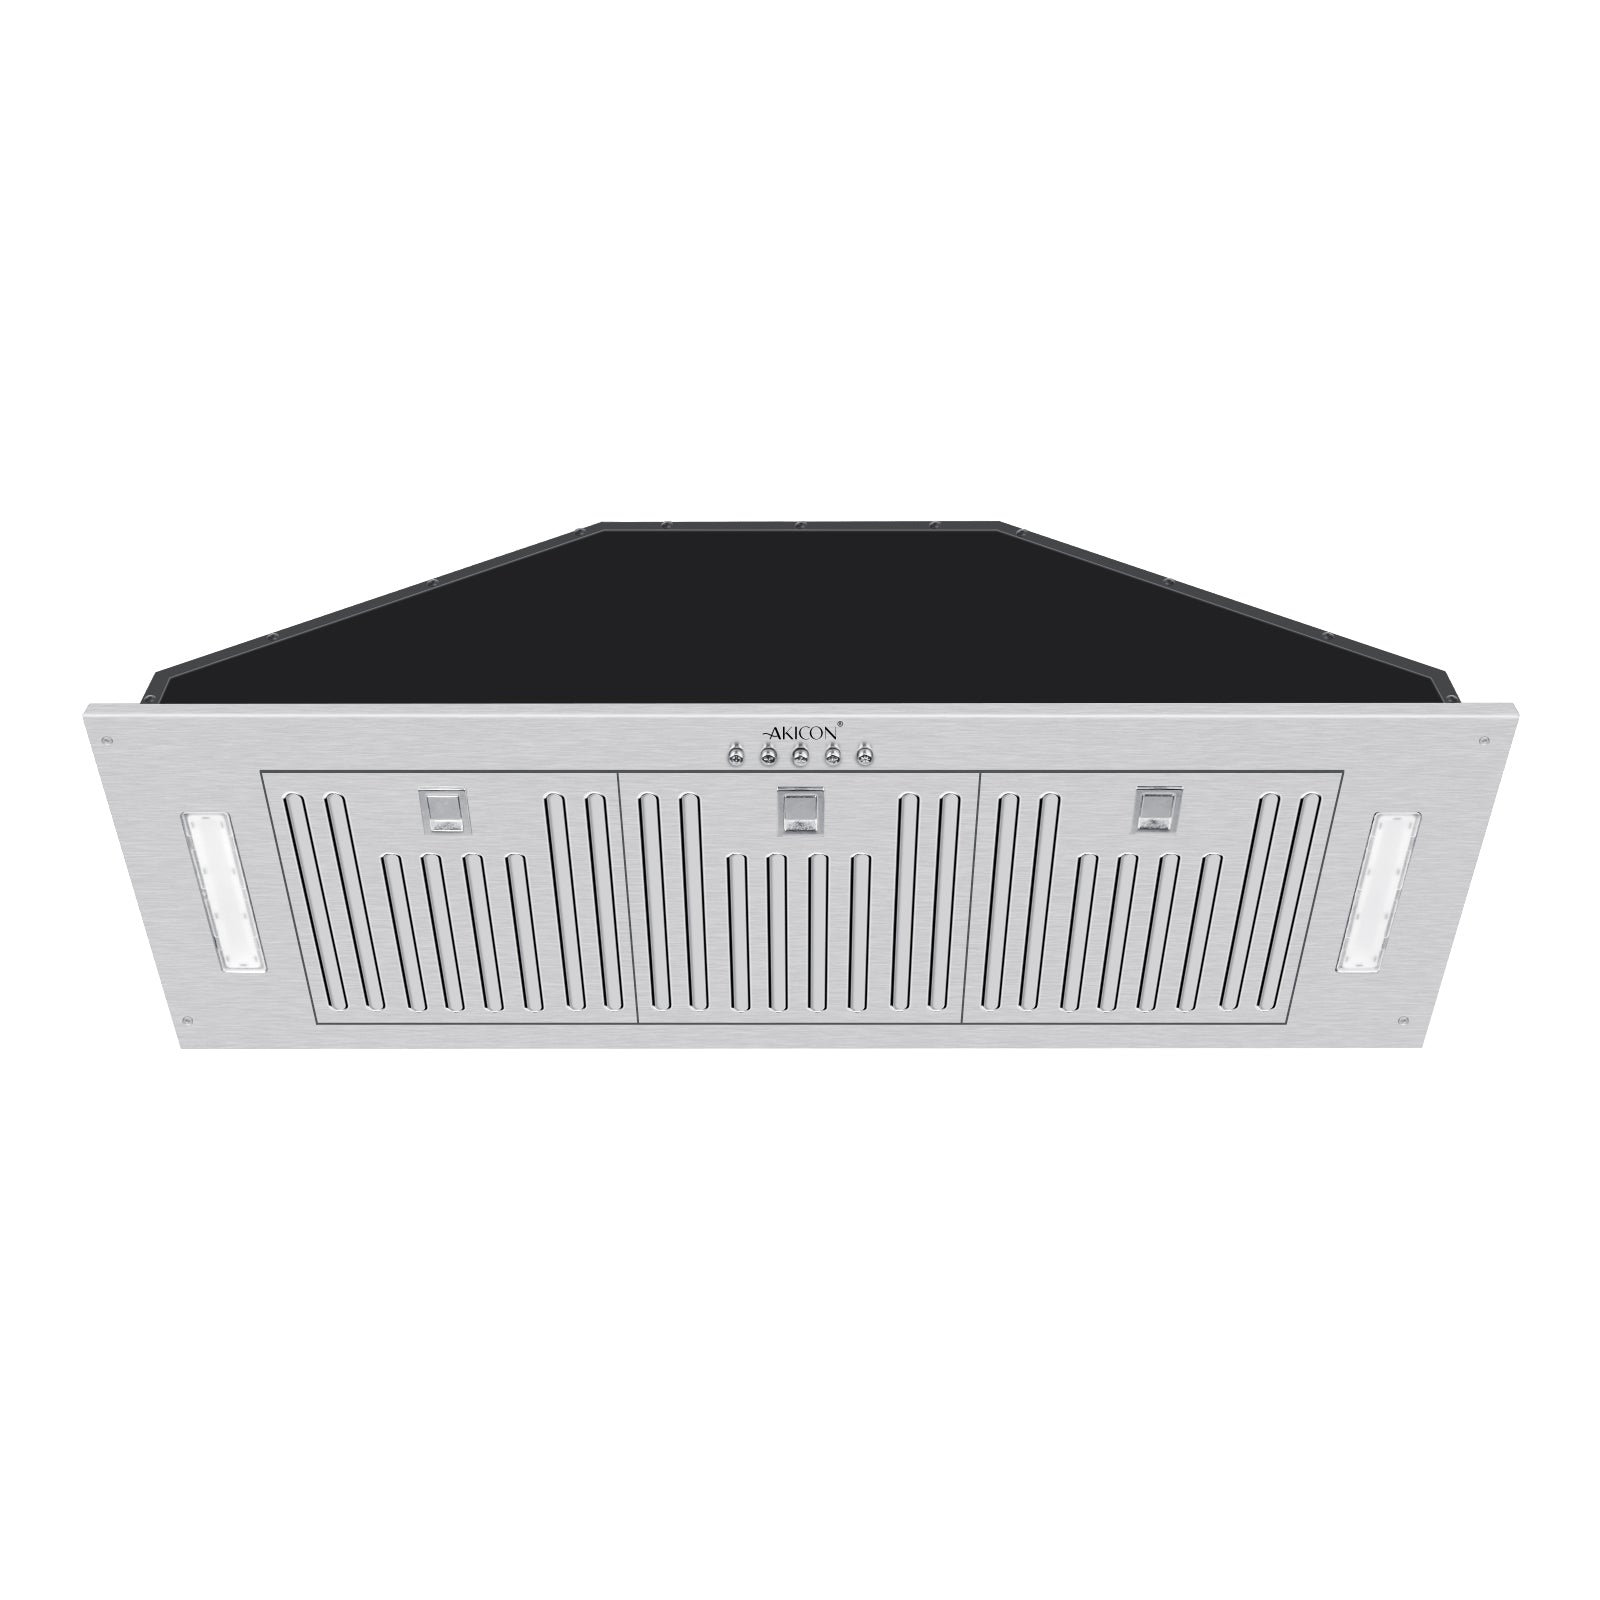 Range Hood Insert 36 Inch, 600 CFM Built-in Kitchen Hood with 3 Speeds, Ultra-Quiet Stainless Steel Ducted Vent Hood Insert with LED Lights and Dishwasher Safe Filters, Button Control Hood Vent